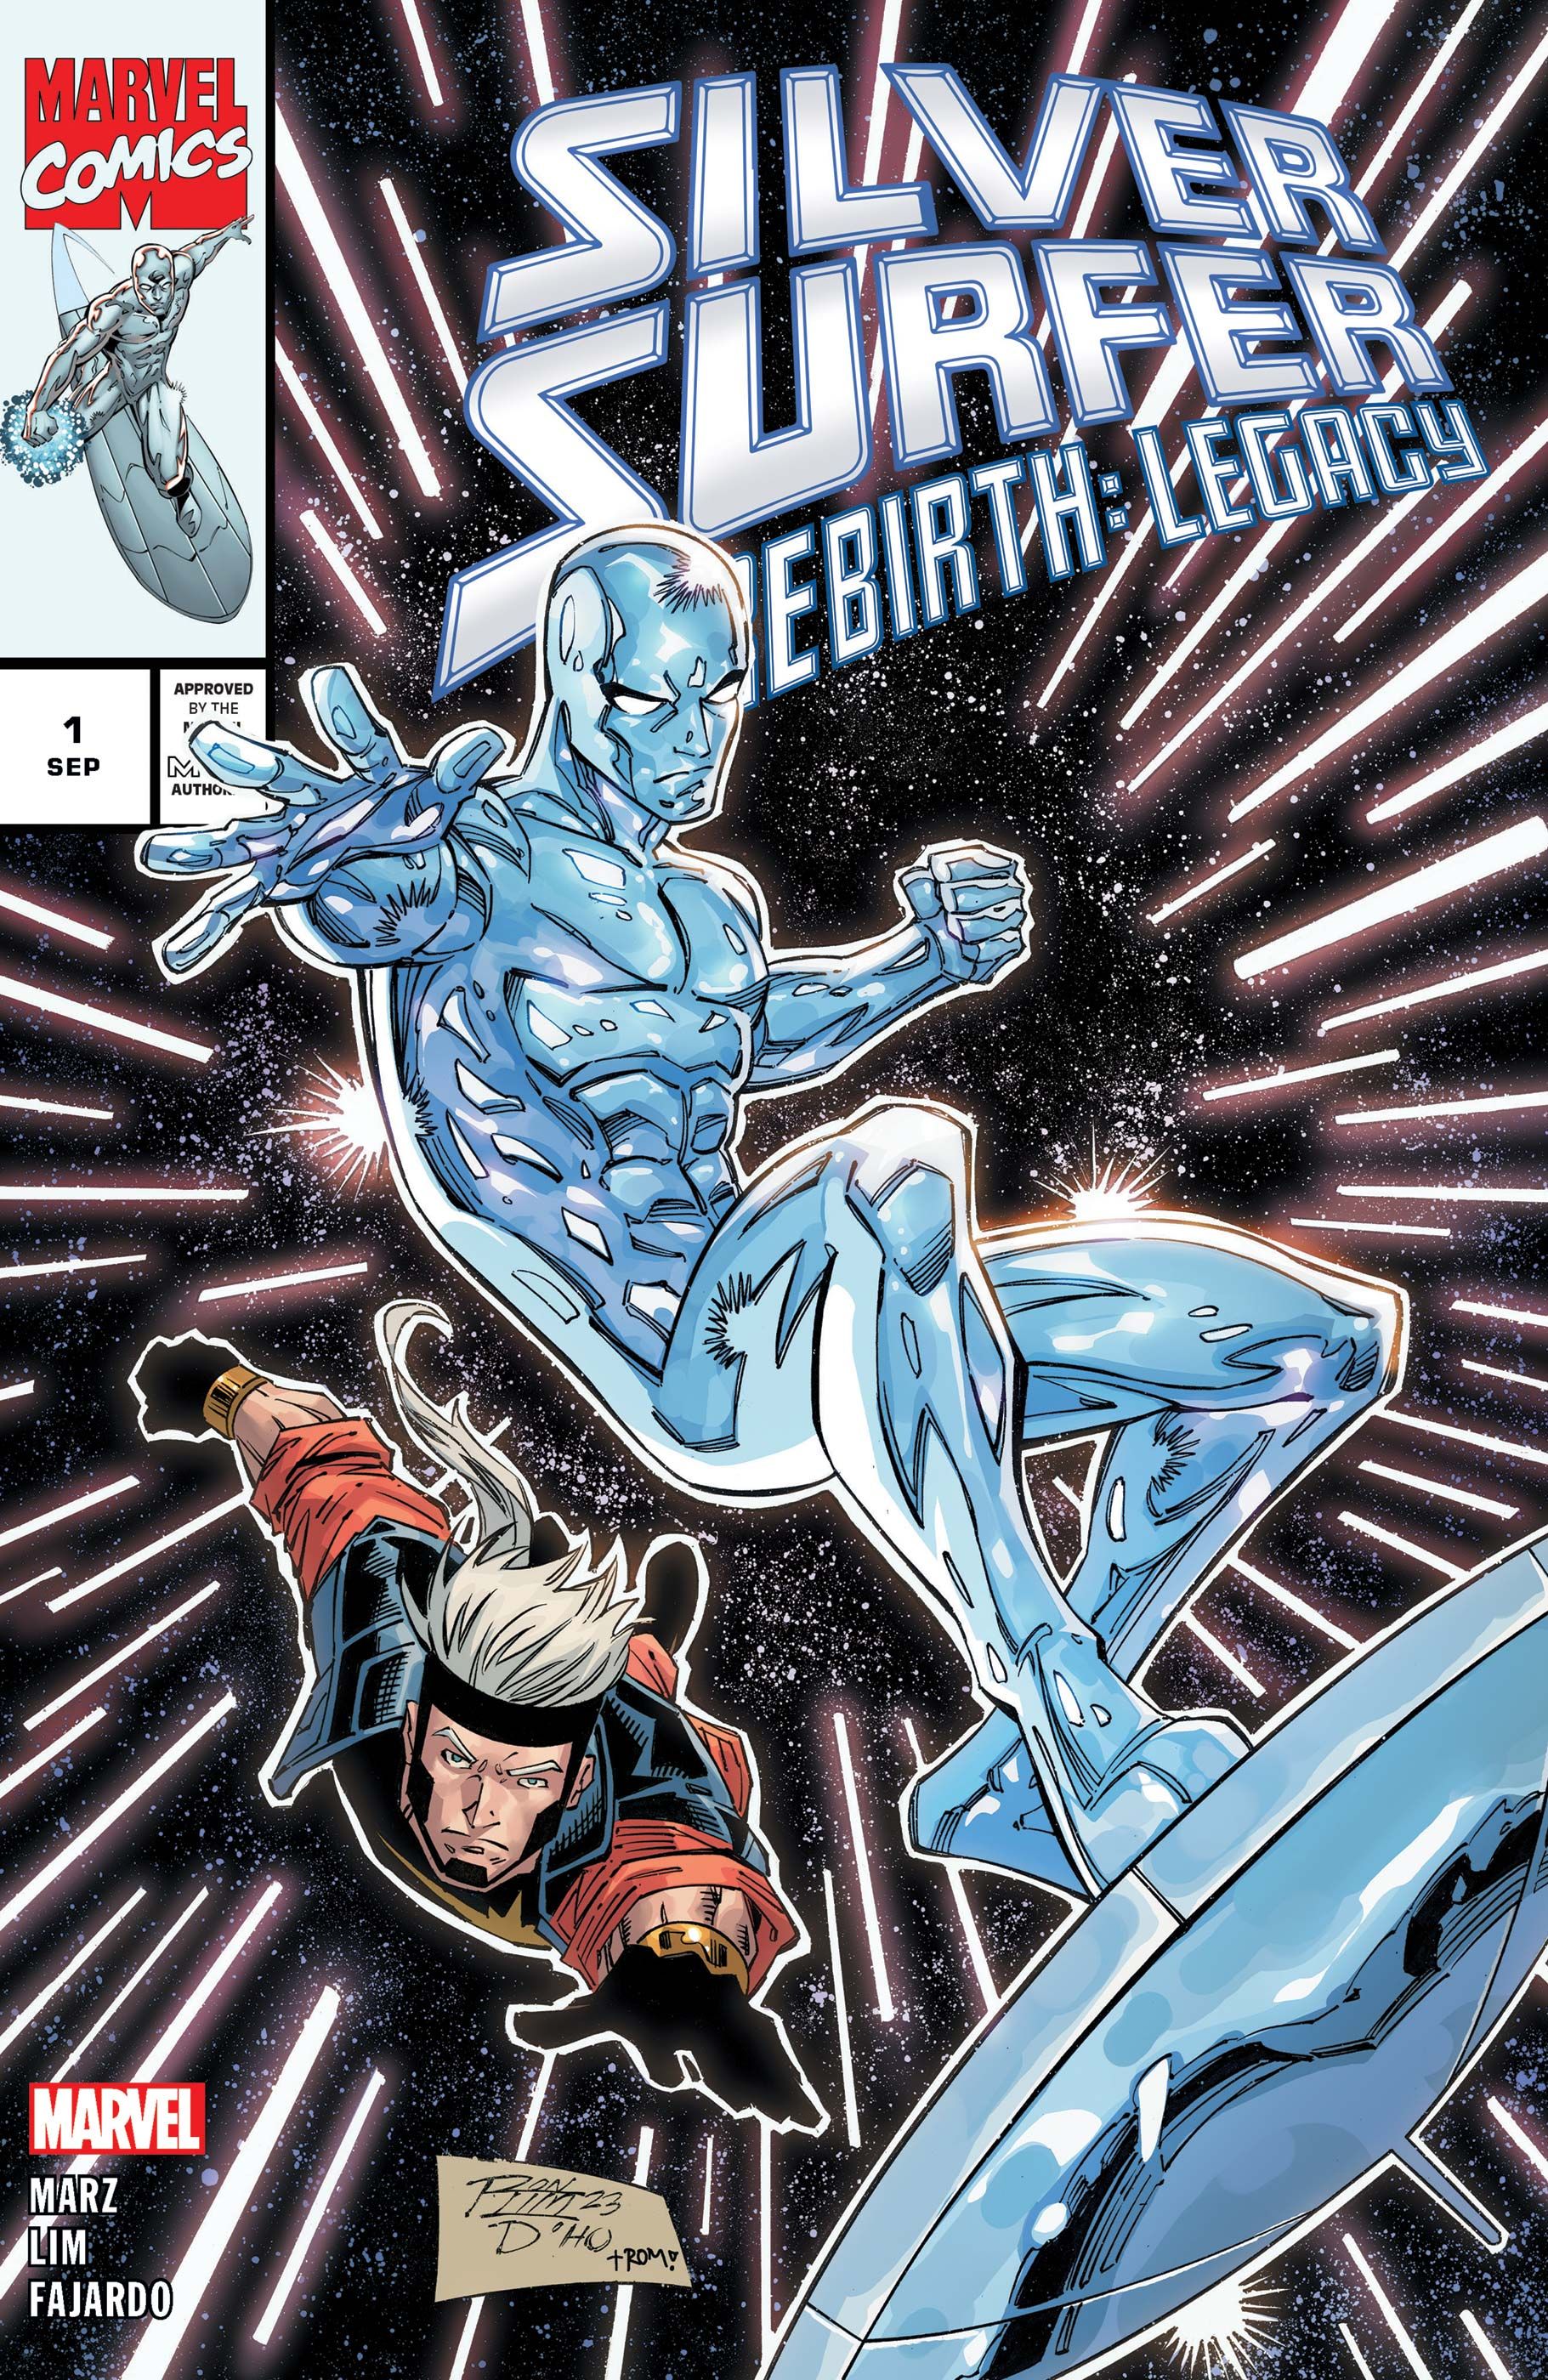 Cover A of Silver Surfer Rebirth Legacy #1